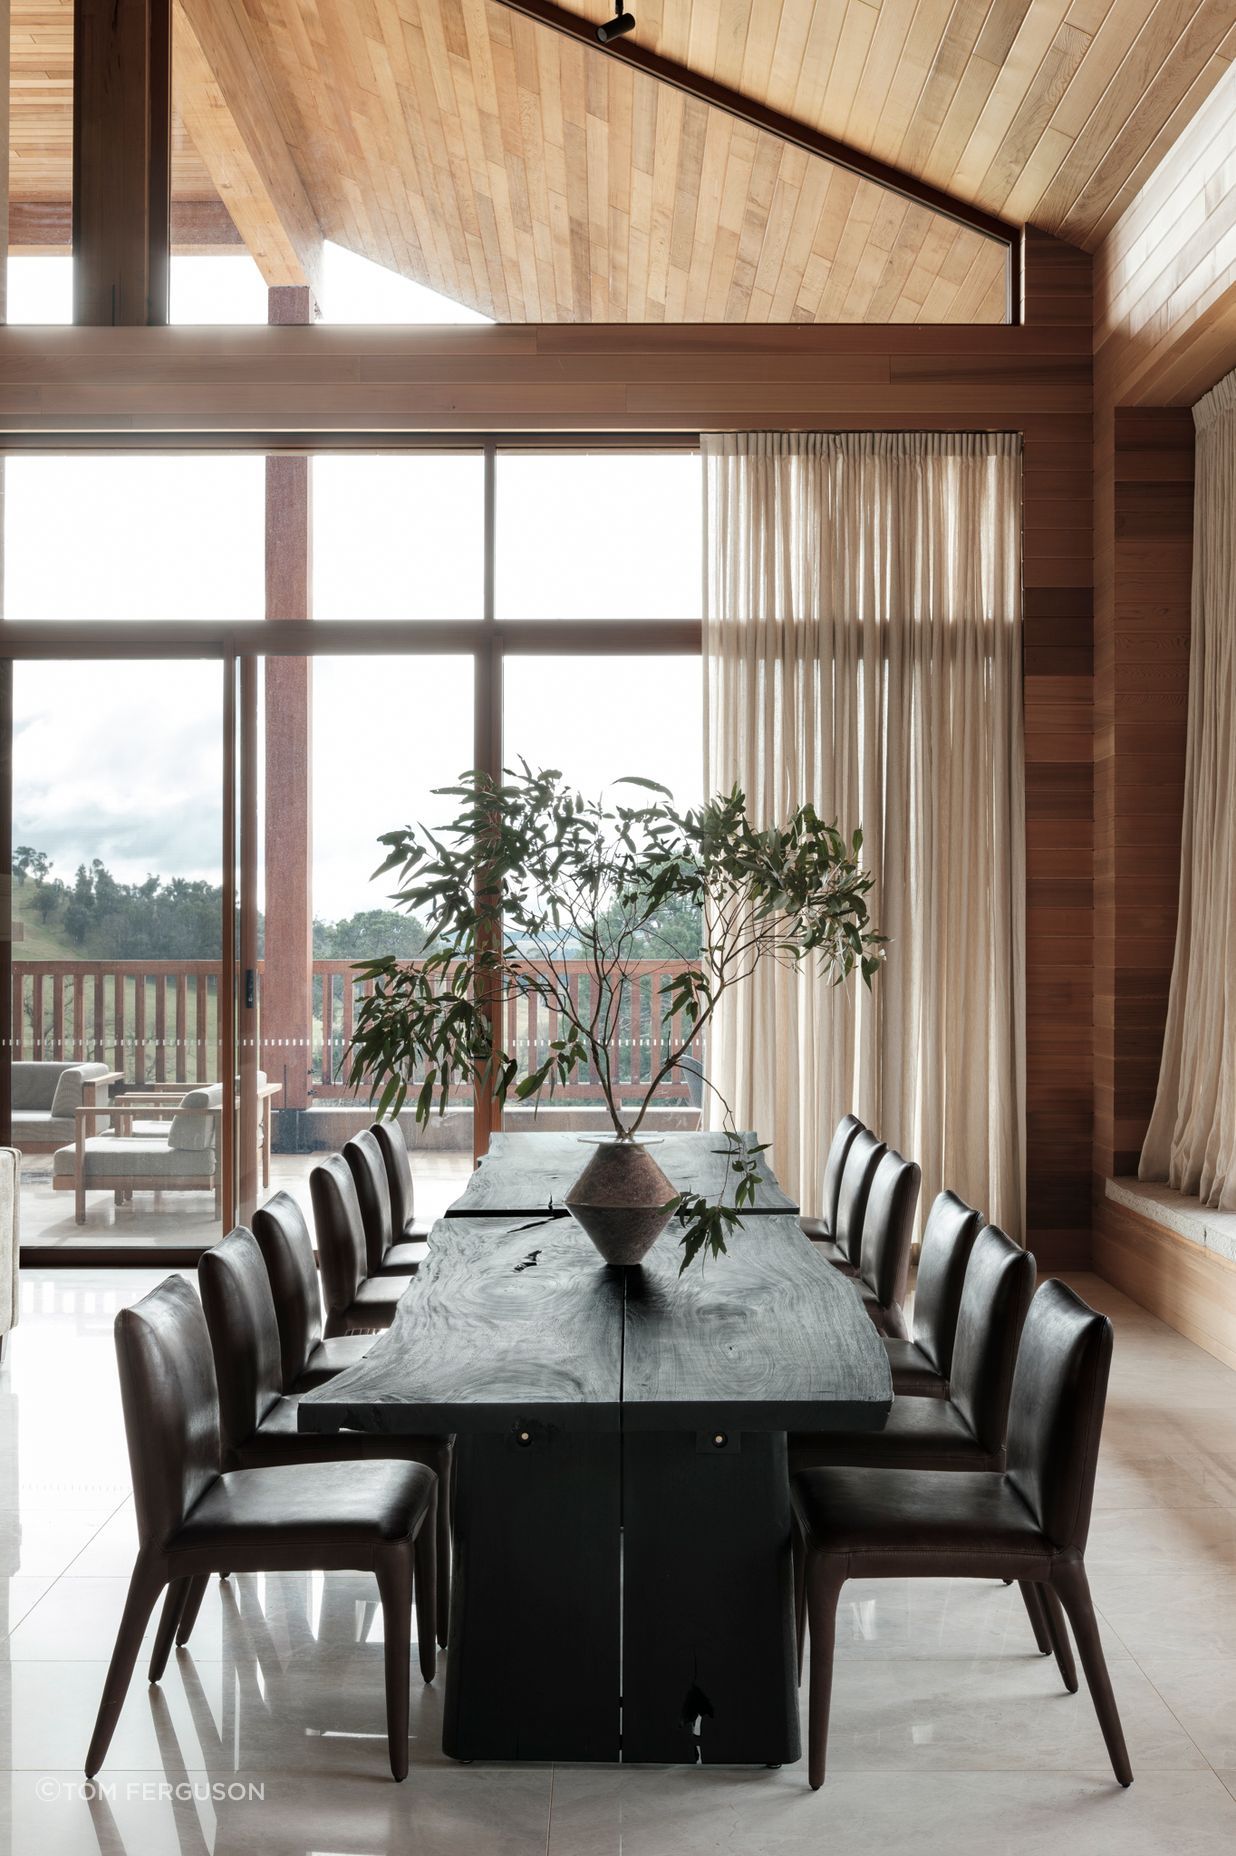 Across two dining tables, up to 14 people can gather for meals.